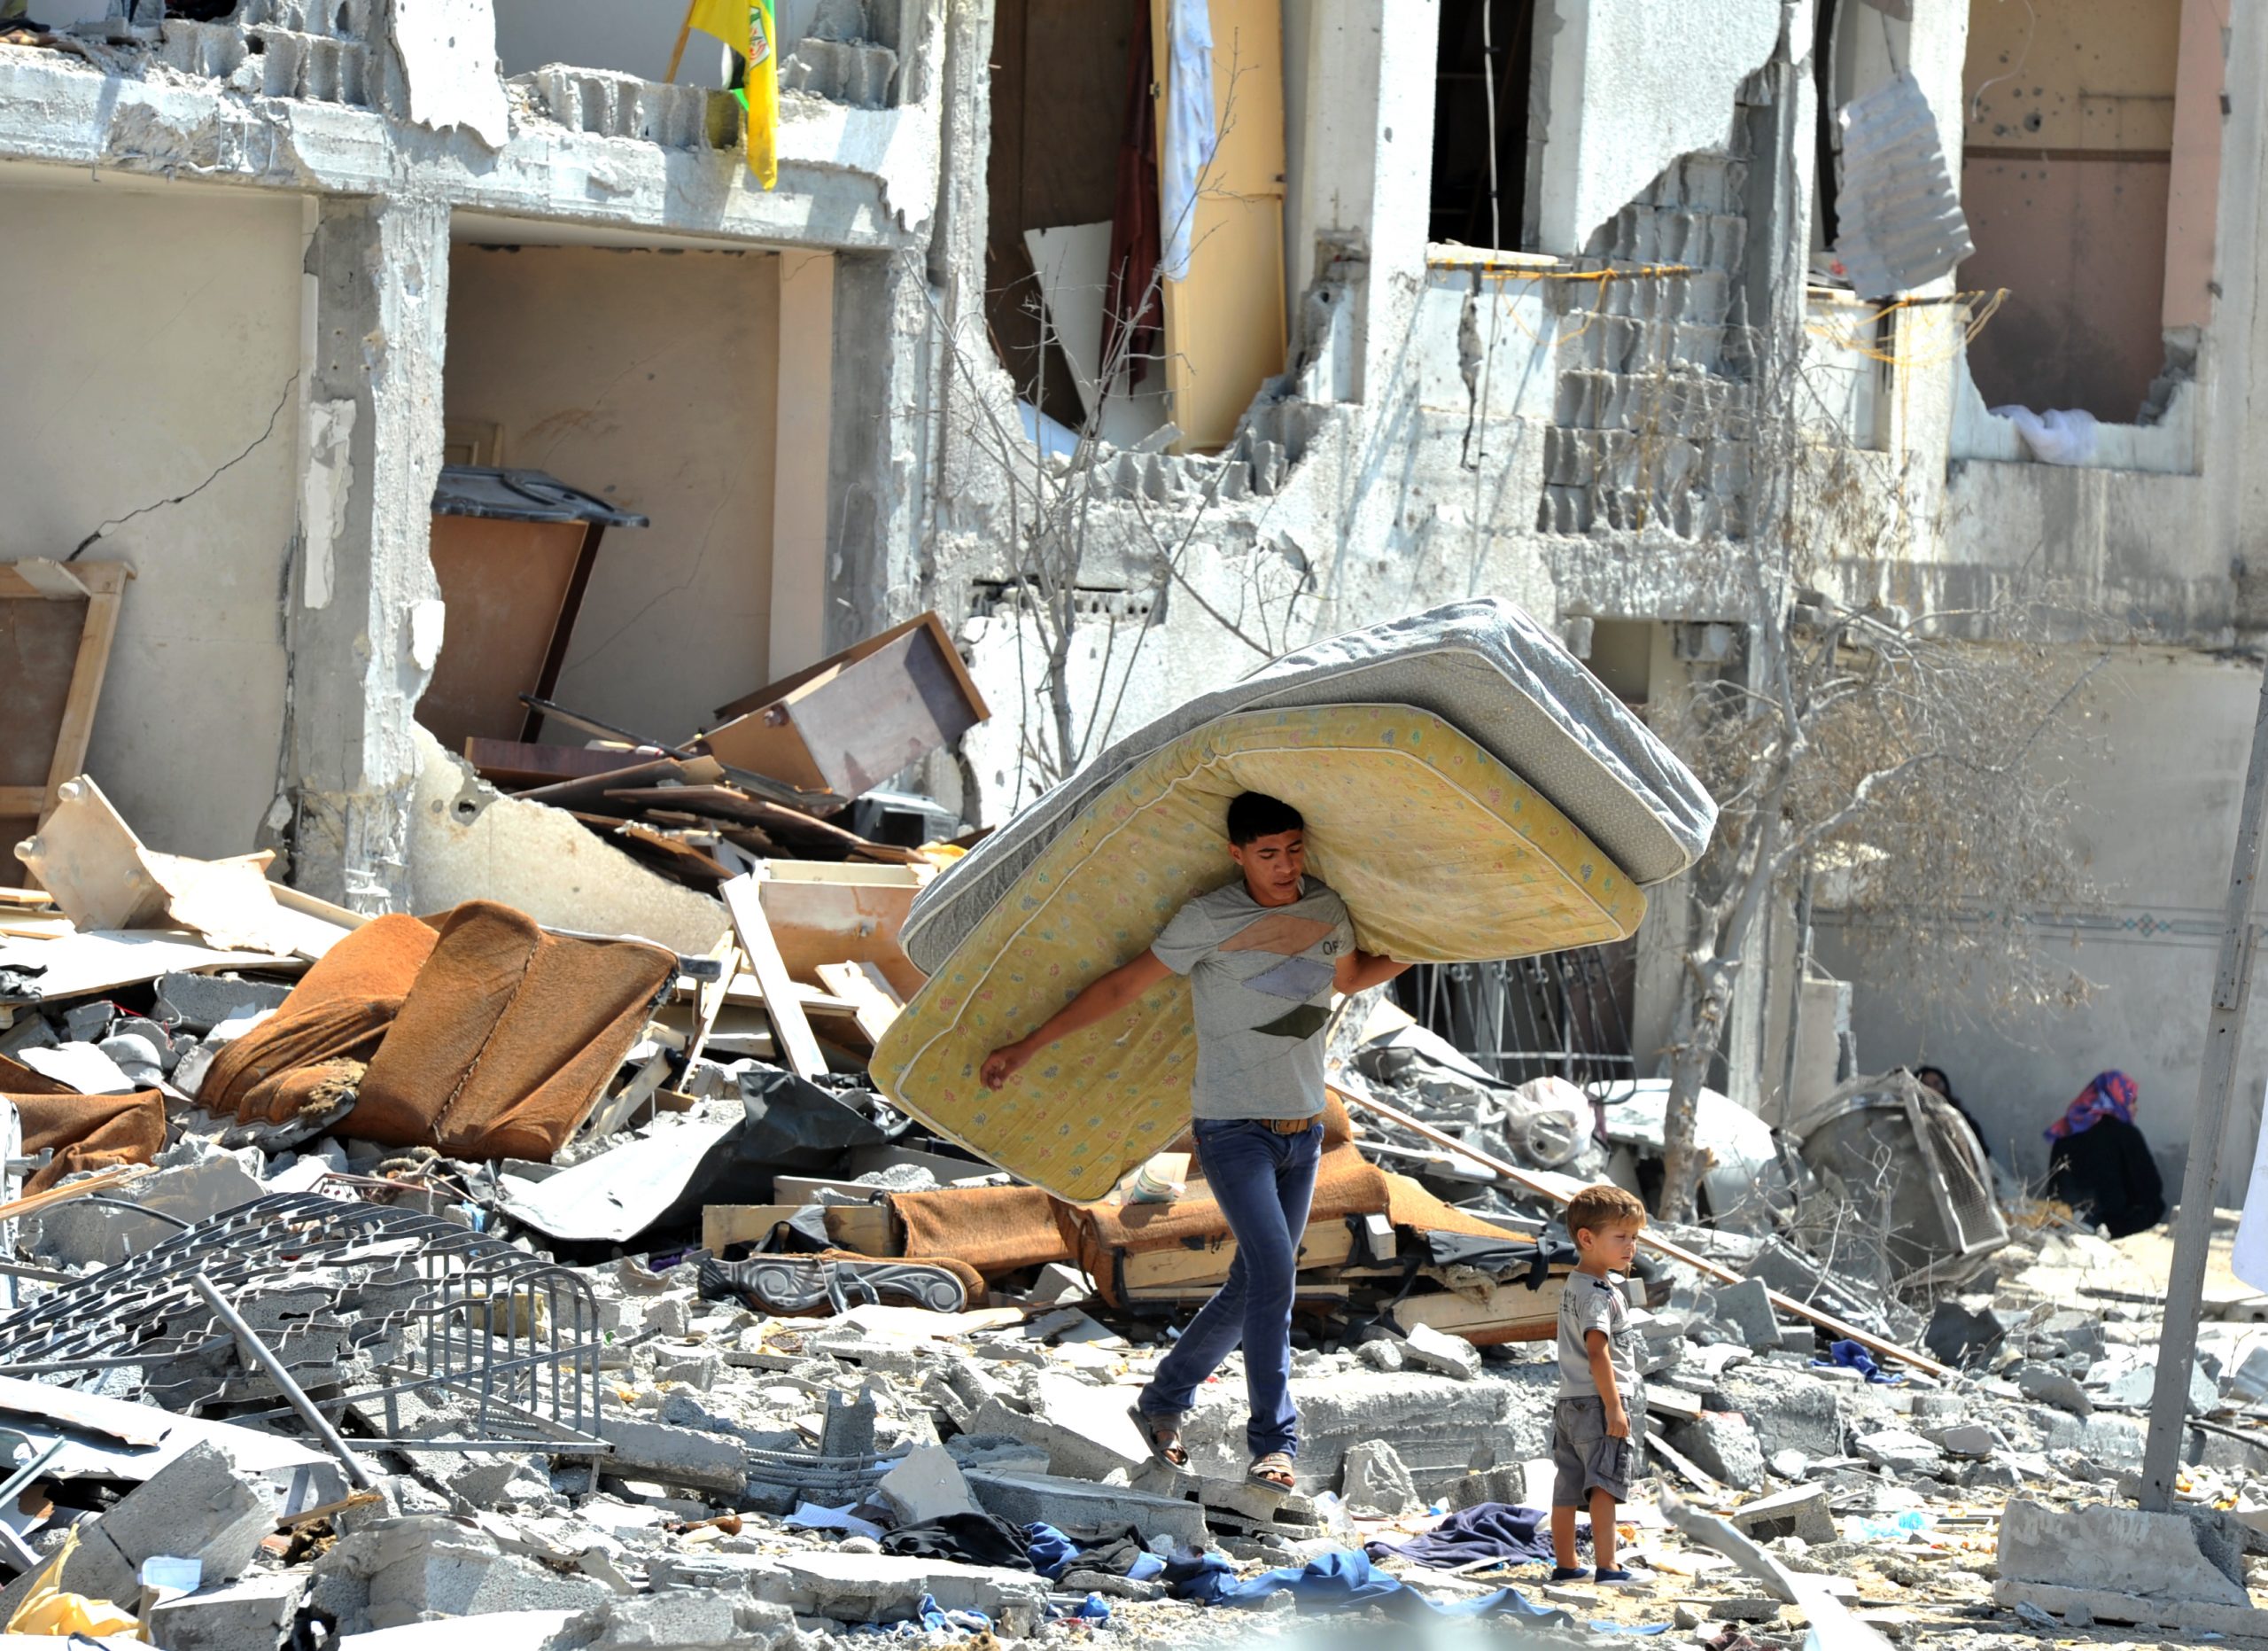 A young man carries a mattress over his head through a ruined Gaza neighbourhood in 2014.